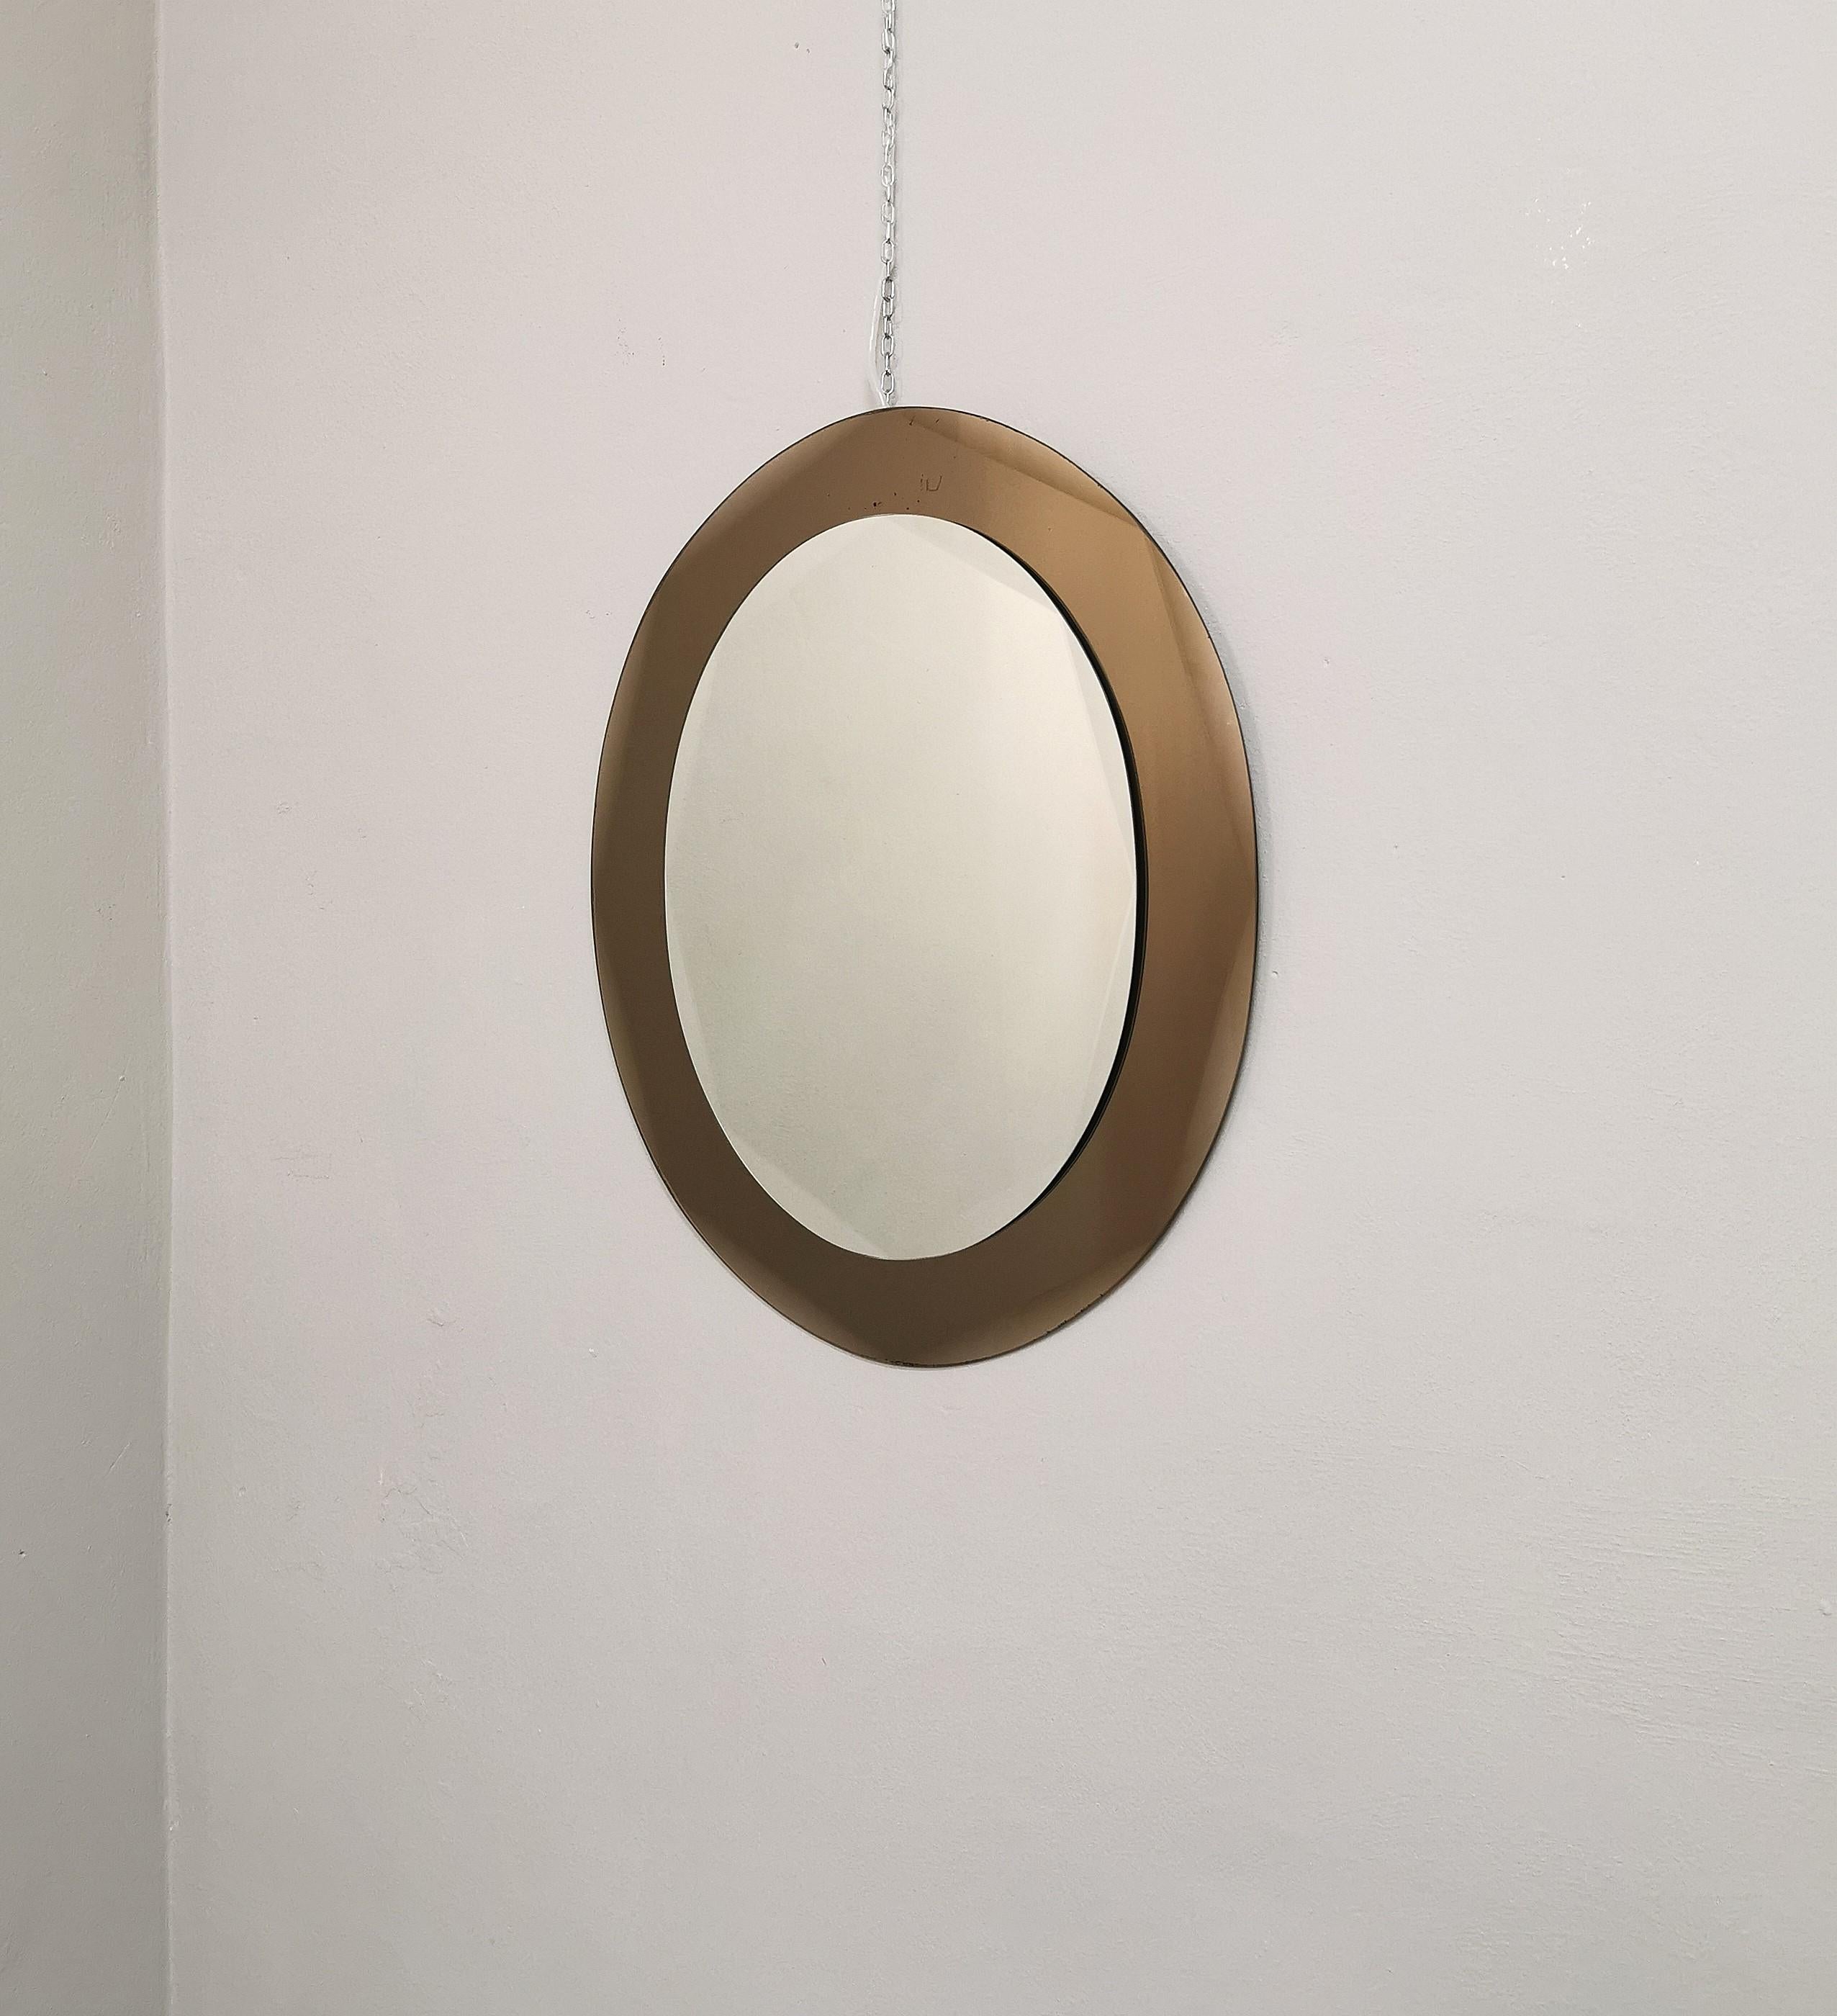 Late 20th Century Wall Mirror Oval Mirrored Smoked Glass Rounded Corners Midcentury Italy 1970s For Sale